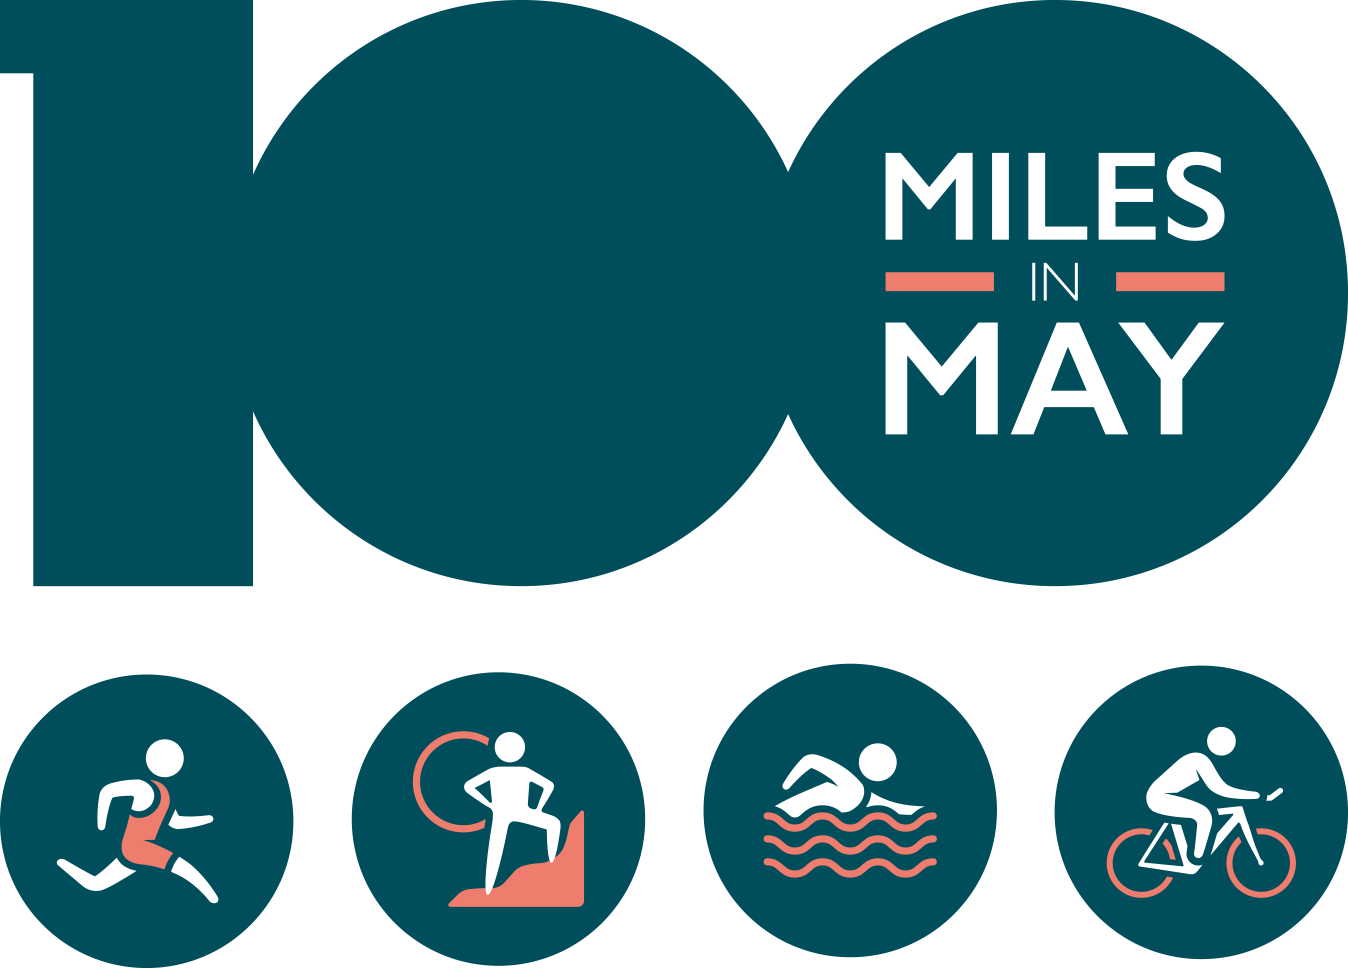 Miles Logo - Miles in May